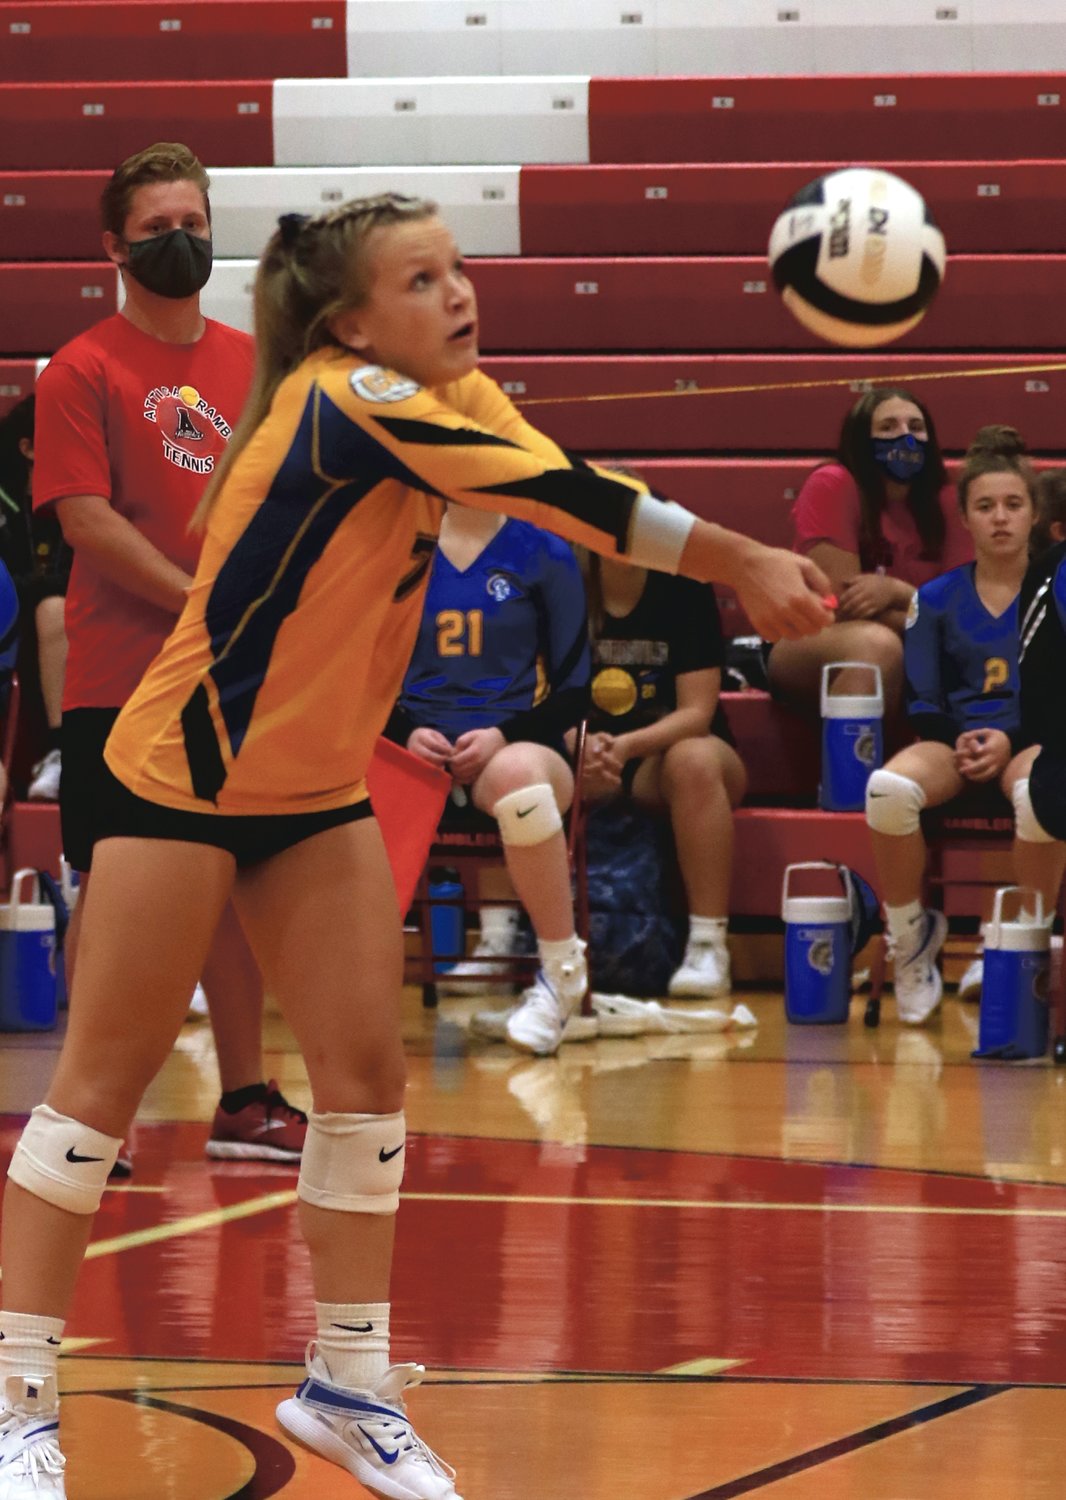 Olivia reed returns a ball for Crawfordsville against Attica this season.